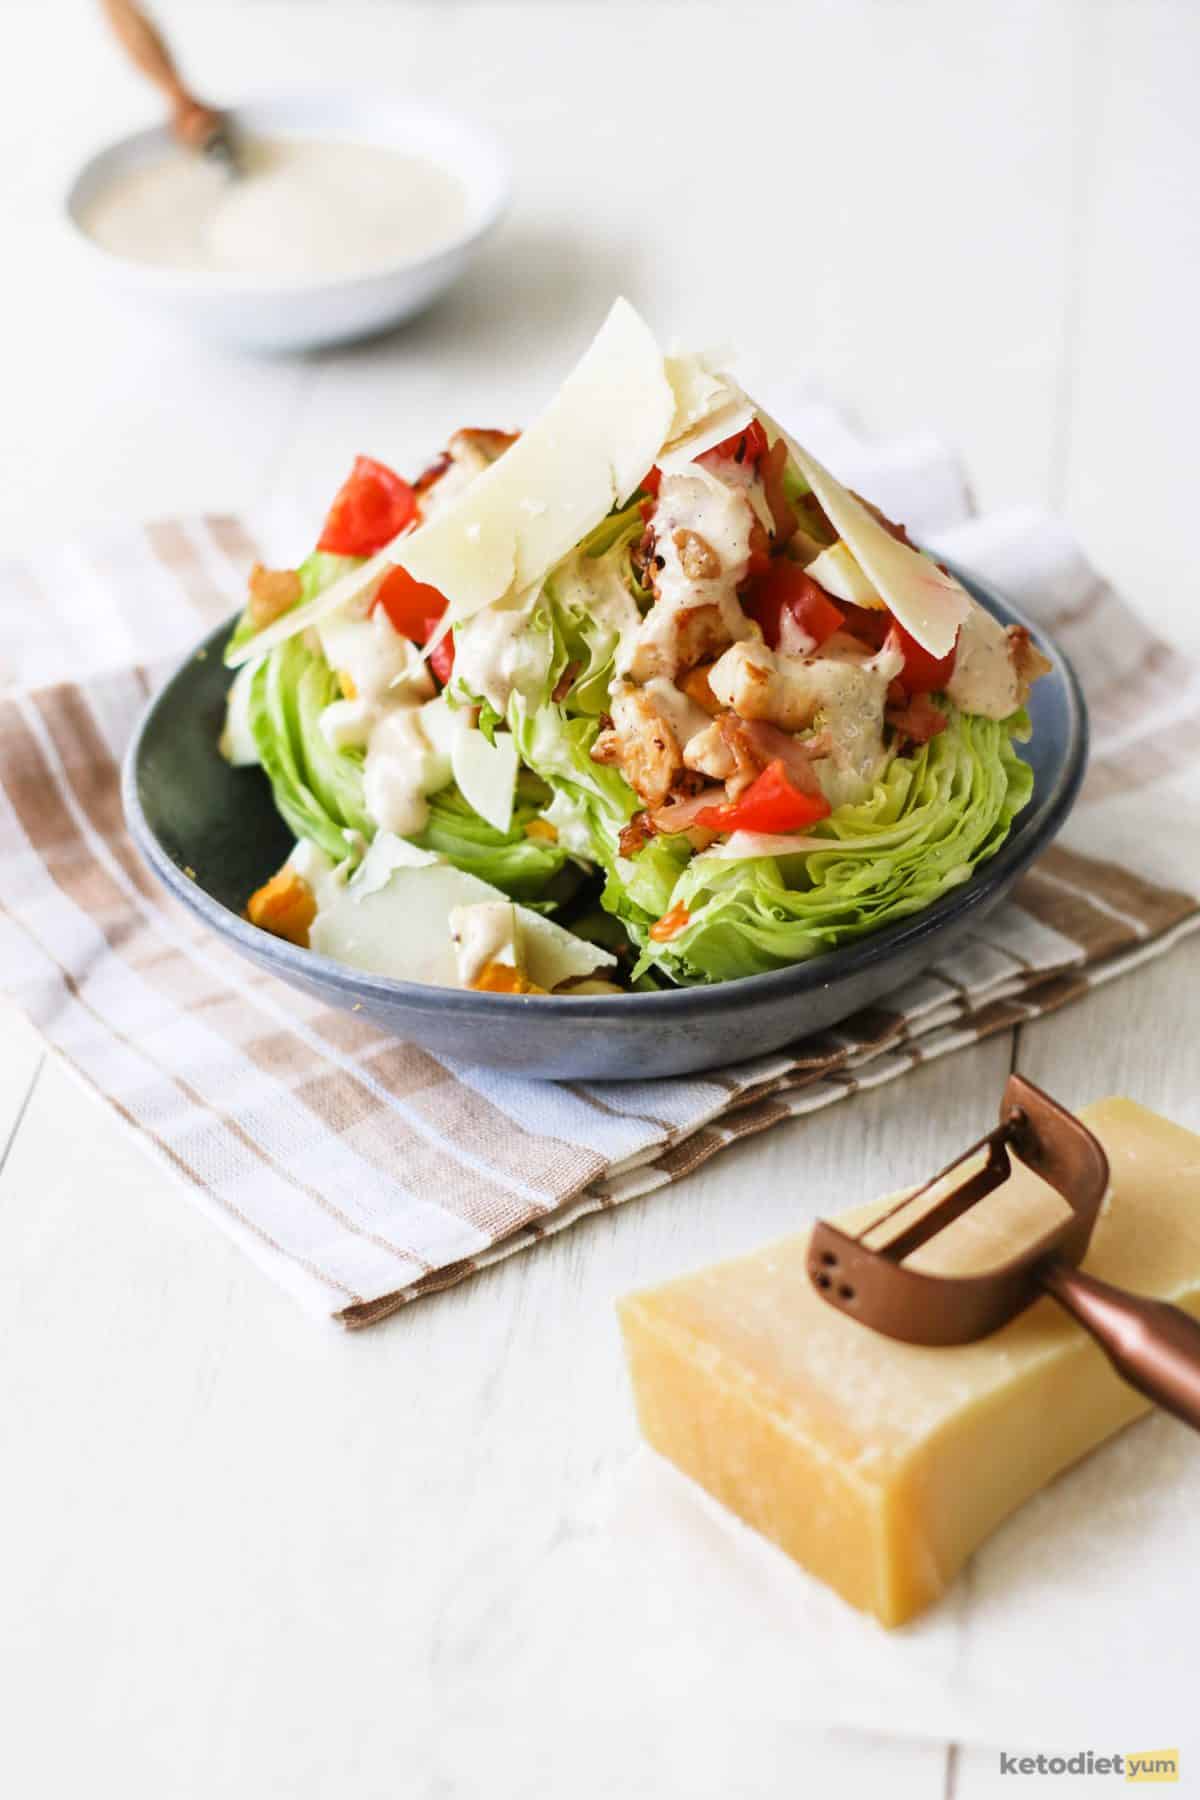 A delicious Caesar Wedge Salad served in a blue bowl on a table